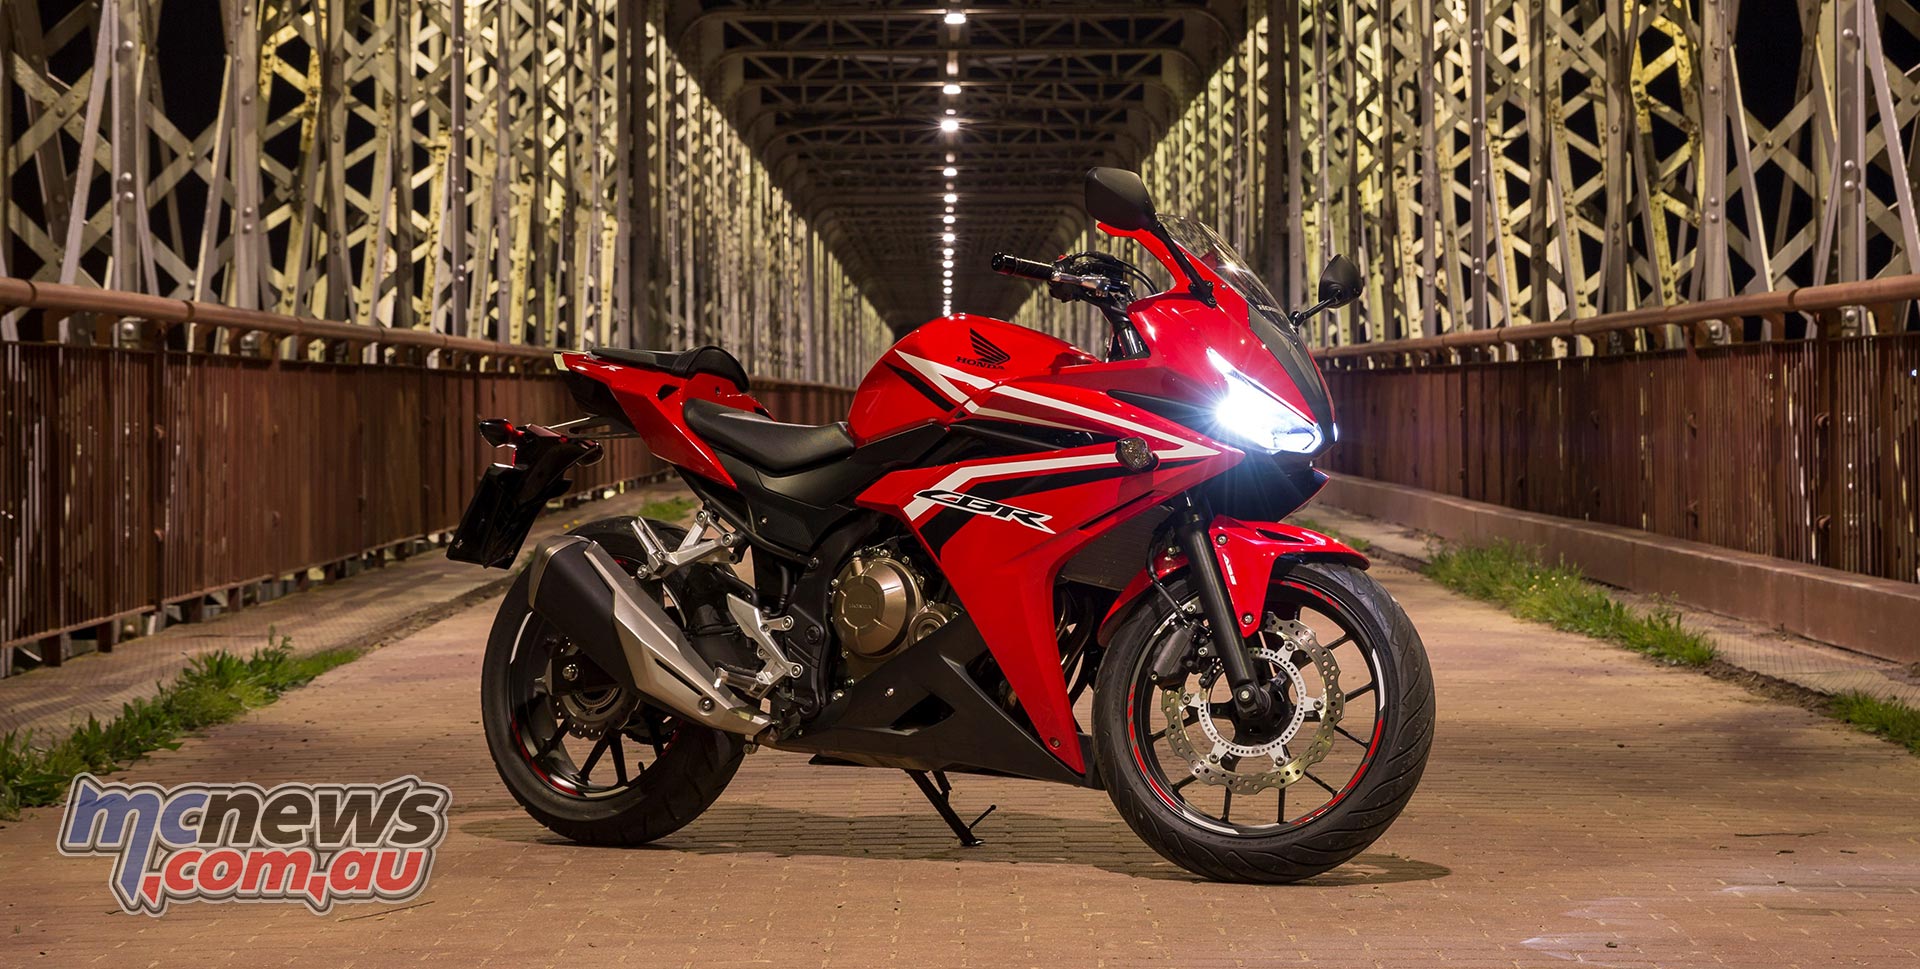 Free on road costs with Honda CBR500R MCNewscomau